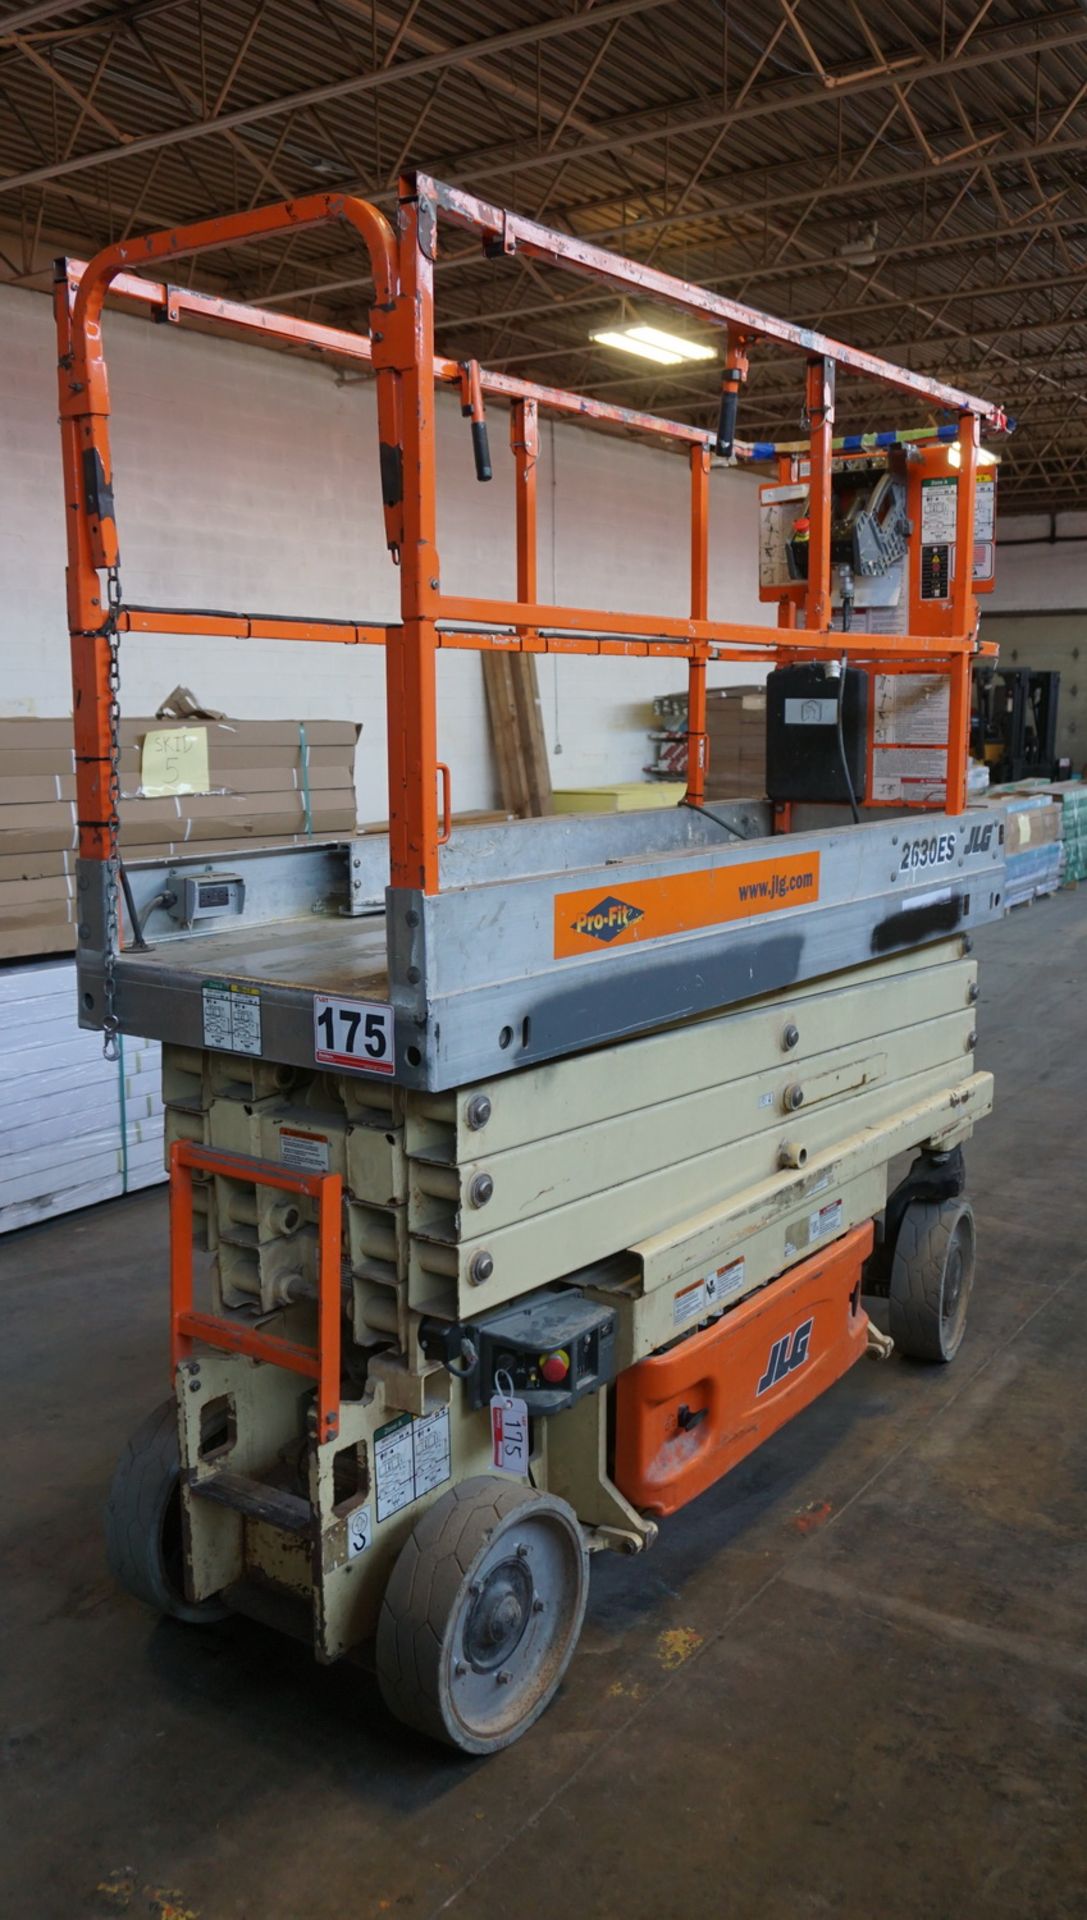 2007 JLG 2630ES ELECTRIC SCISSOR LIFT W/ 26"W X 25.4'H MAX HEIGHT, 500LBS CAP, W/ BUILT-IN CHARGER - Image 2 of 4